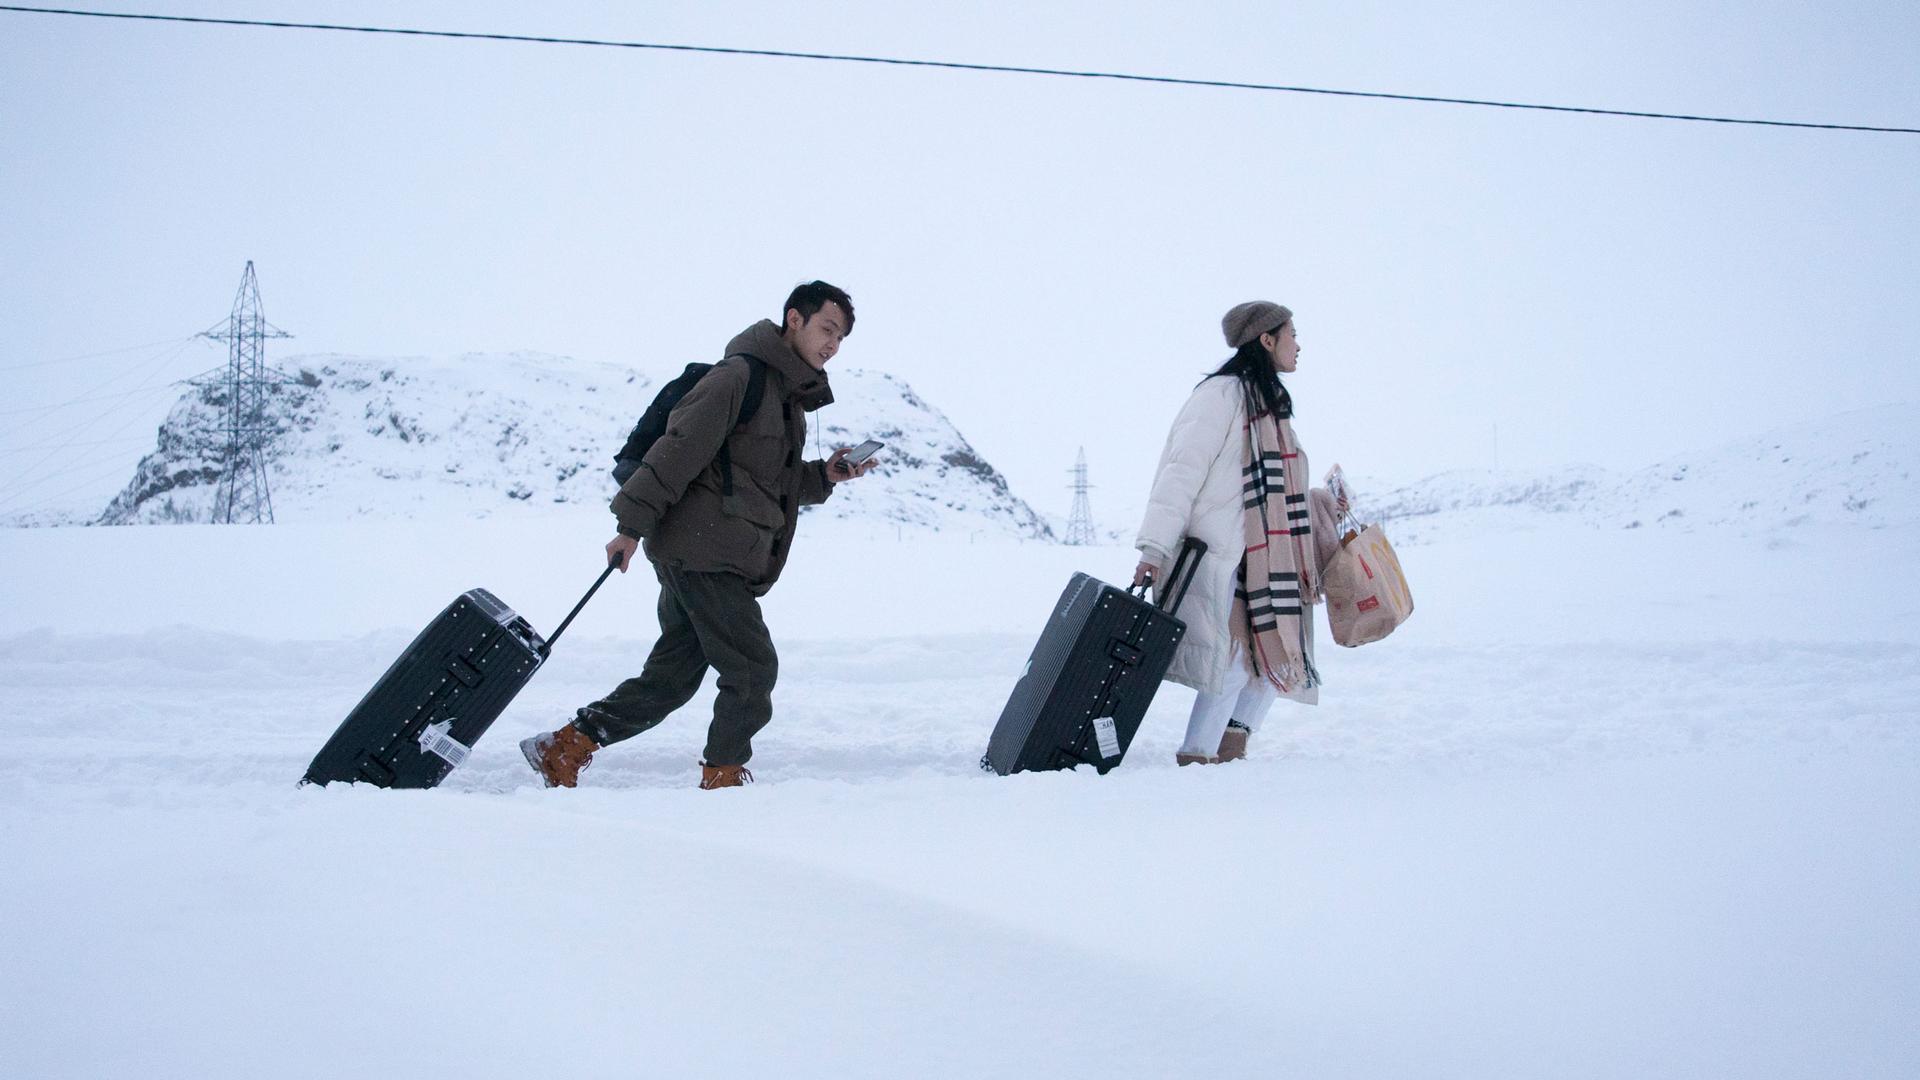 Two people are shown pulling their suitcases amongst a snowy path.